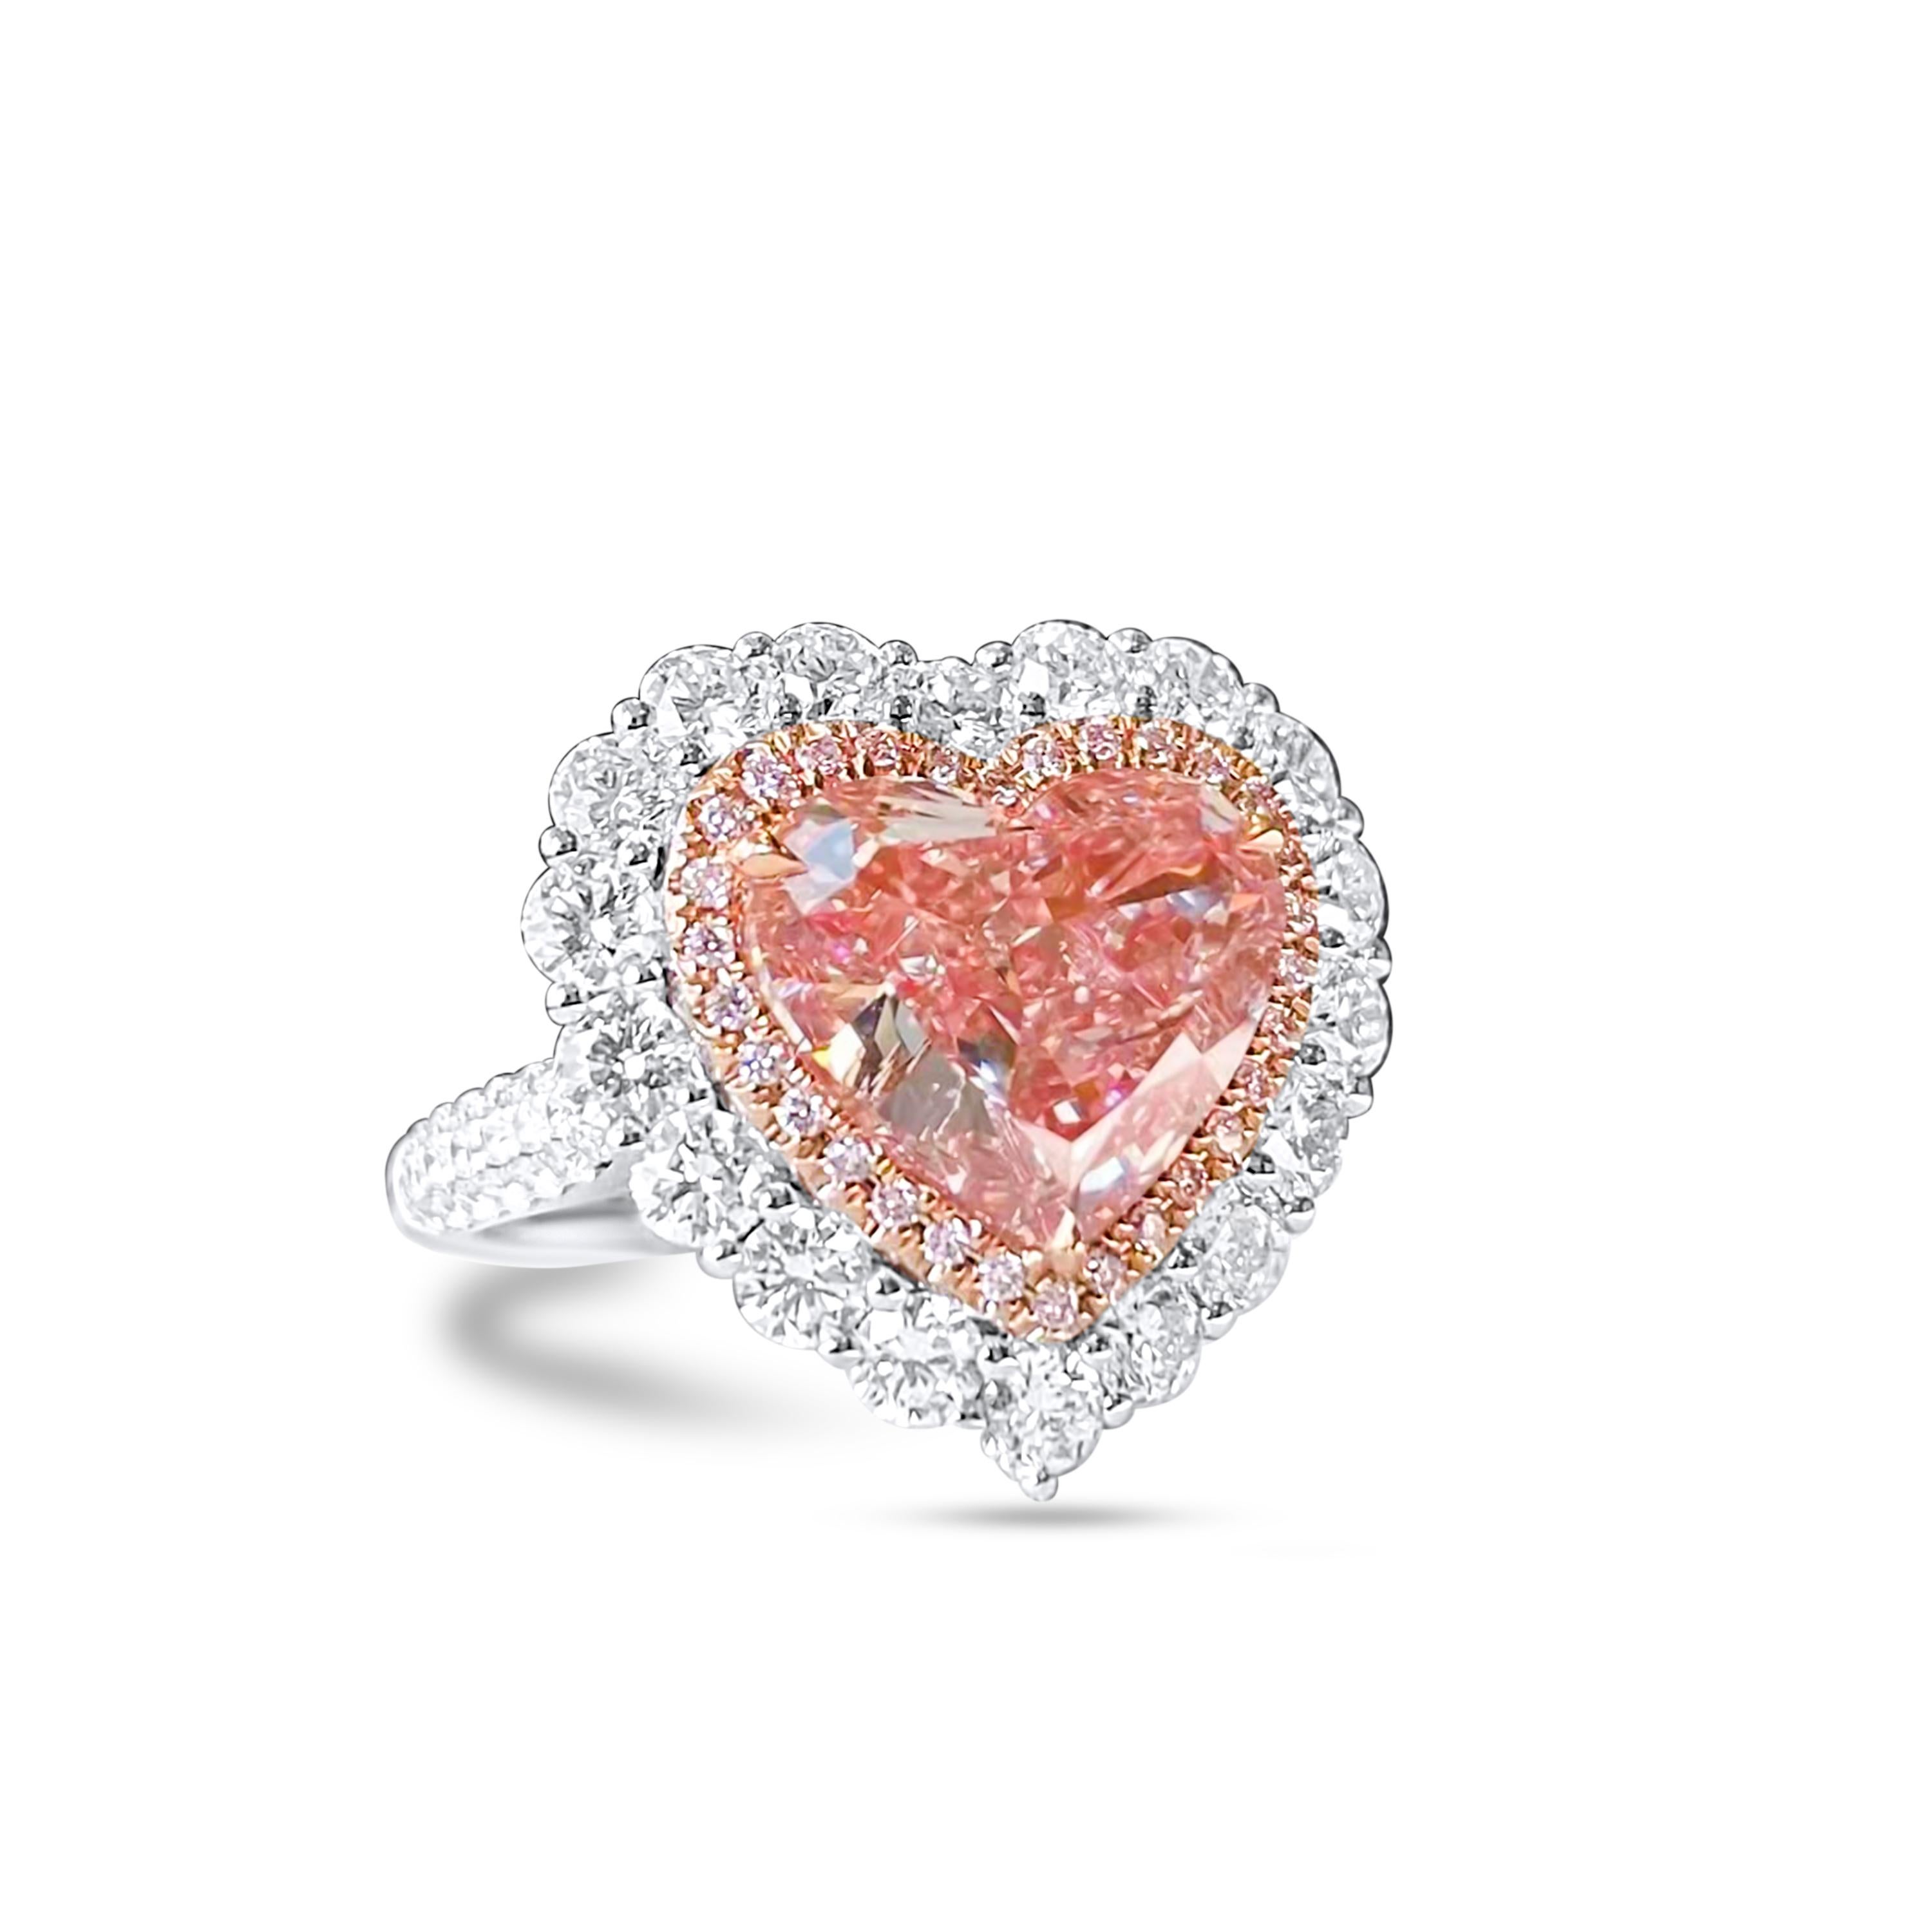 We invite you to discover this rare and modern cocktail ring set with a 5,07ct carat GIA certified Light Pinkish Brown heart  diamond accented with two round diamond halos colorless. The surprise of this magnificent jewel is that it can also be worn